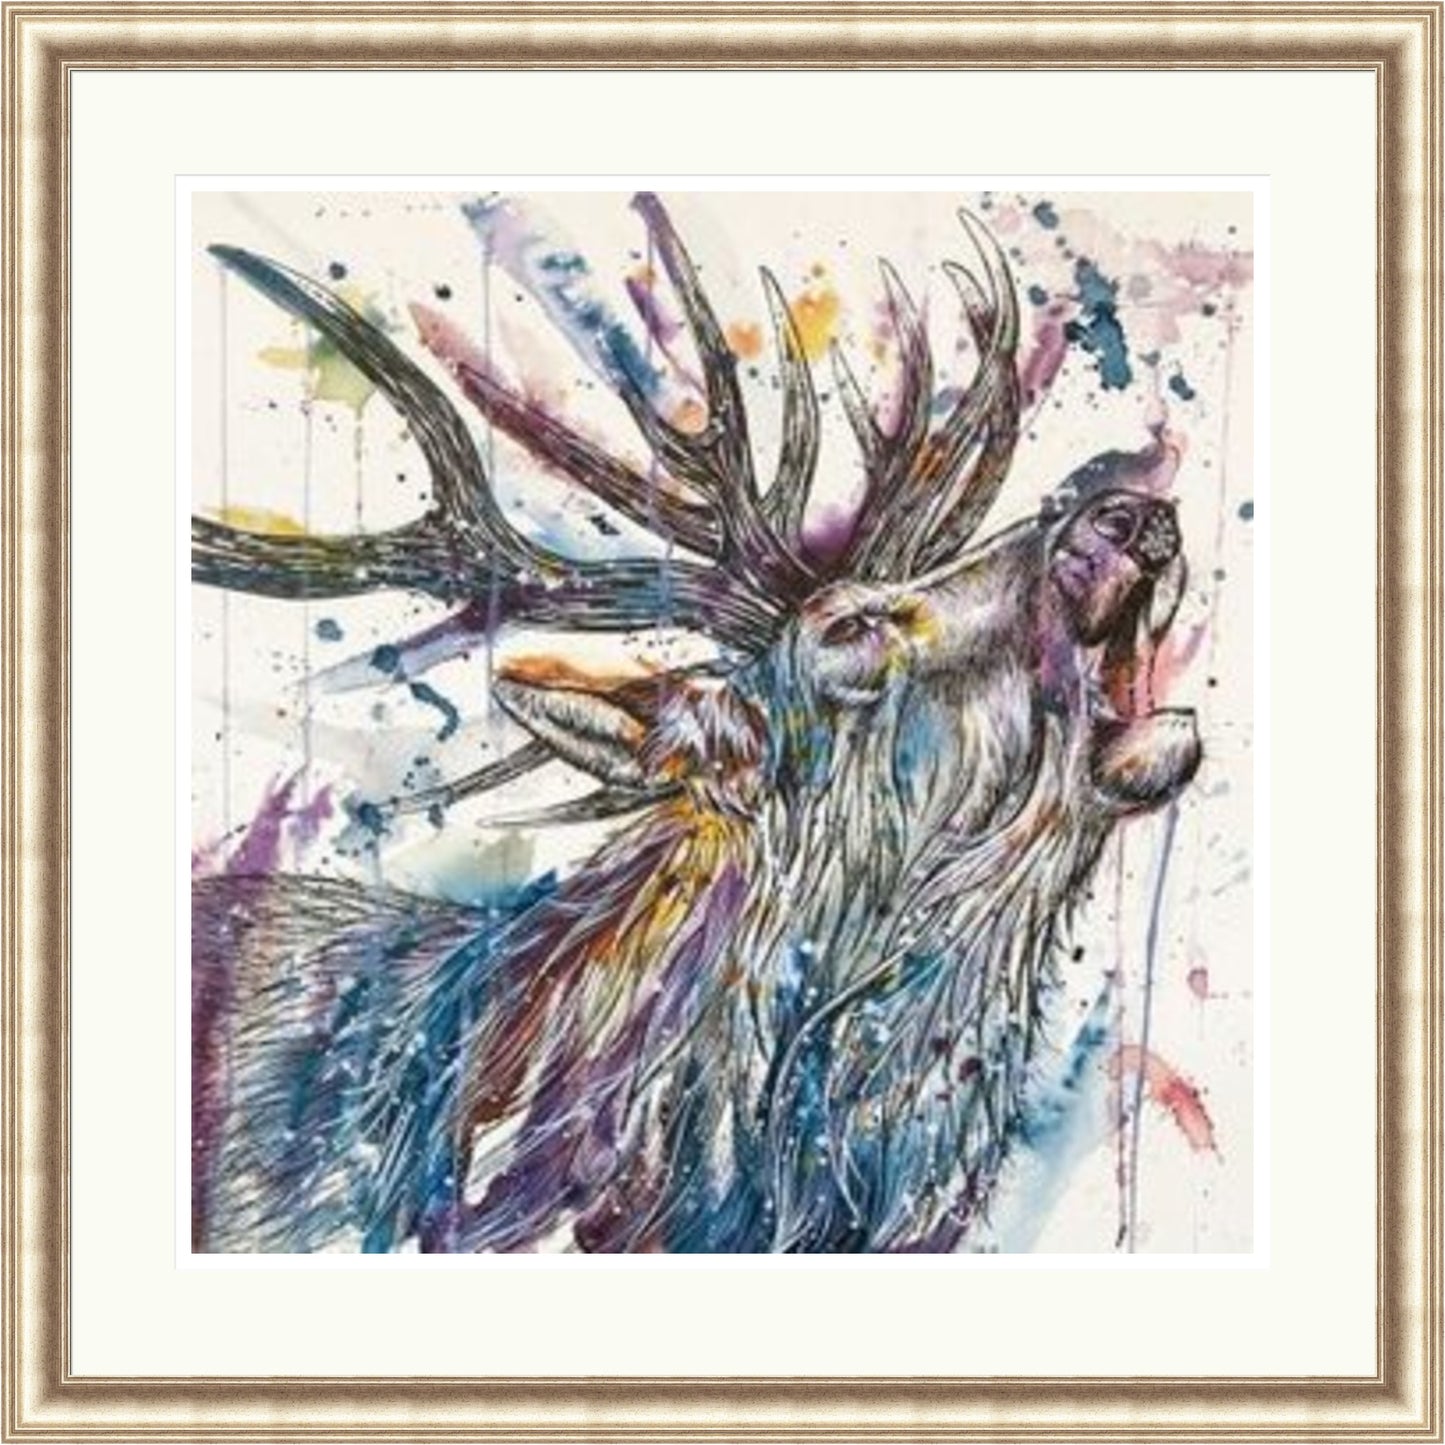 Call of the Wild Stag Art Print by Tori Ratcliffe